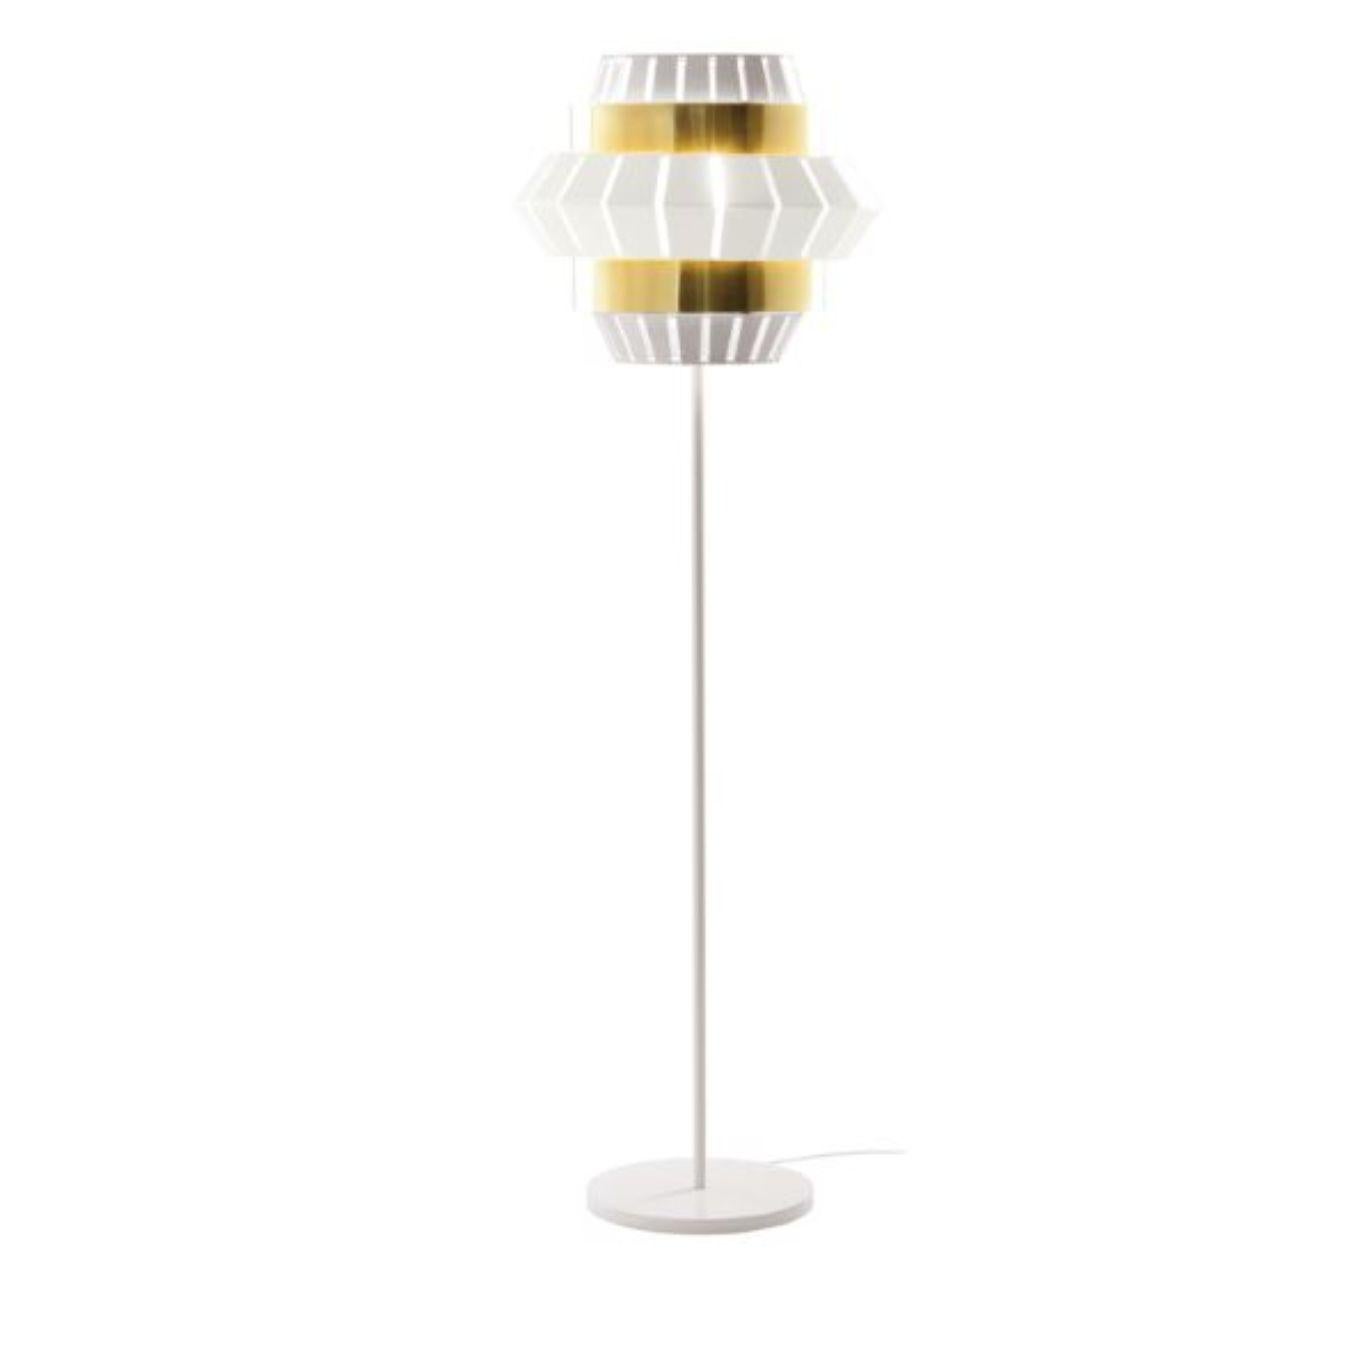 Ivory Comb floor lamp with brass ring by Dooq
Dimensions: W 54 x D 54 x H 175 cm
Materials: lacquered metal, polished brass.
Also available in different colors and materials.

Information:
230V/50Hz
E27/1x20W LED
120V/60Hz
E26/1x15W LED
bulb not